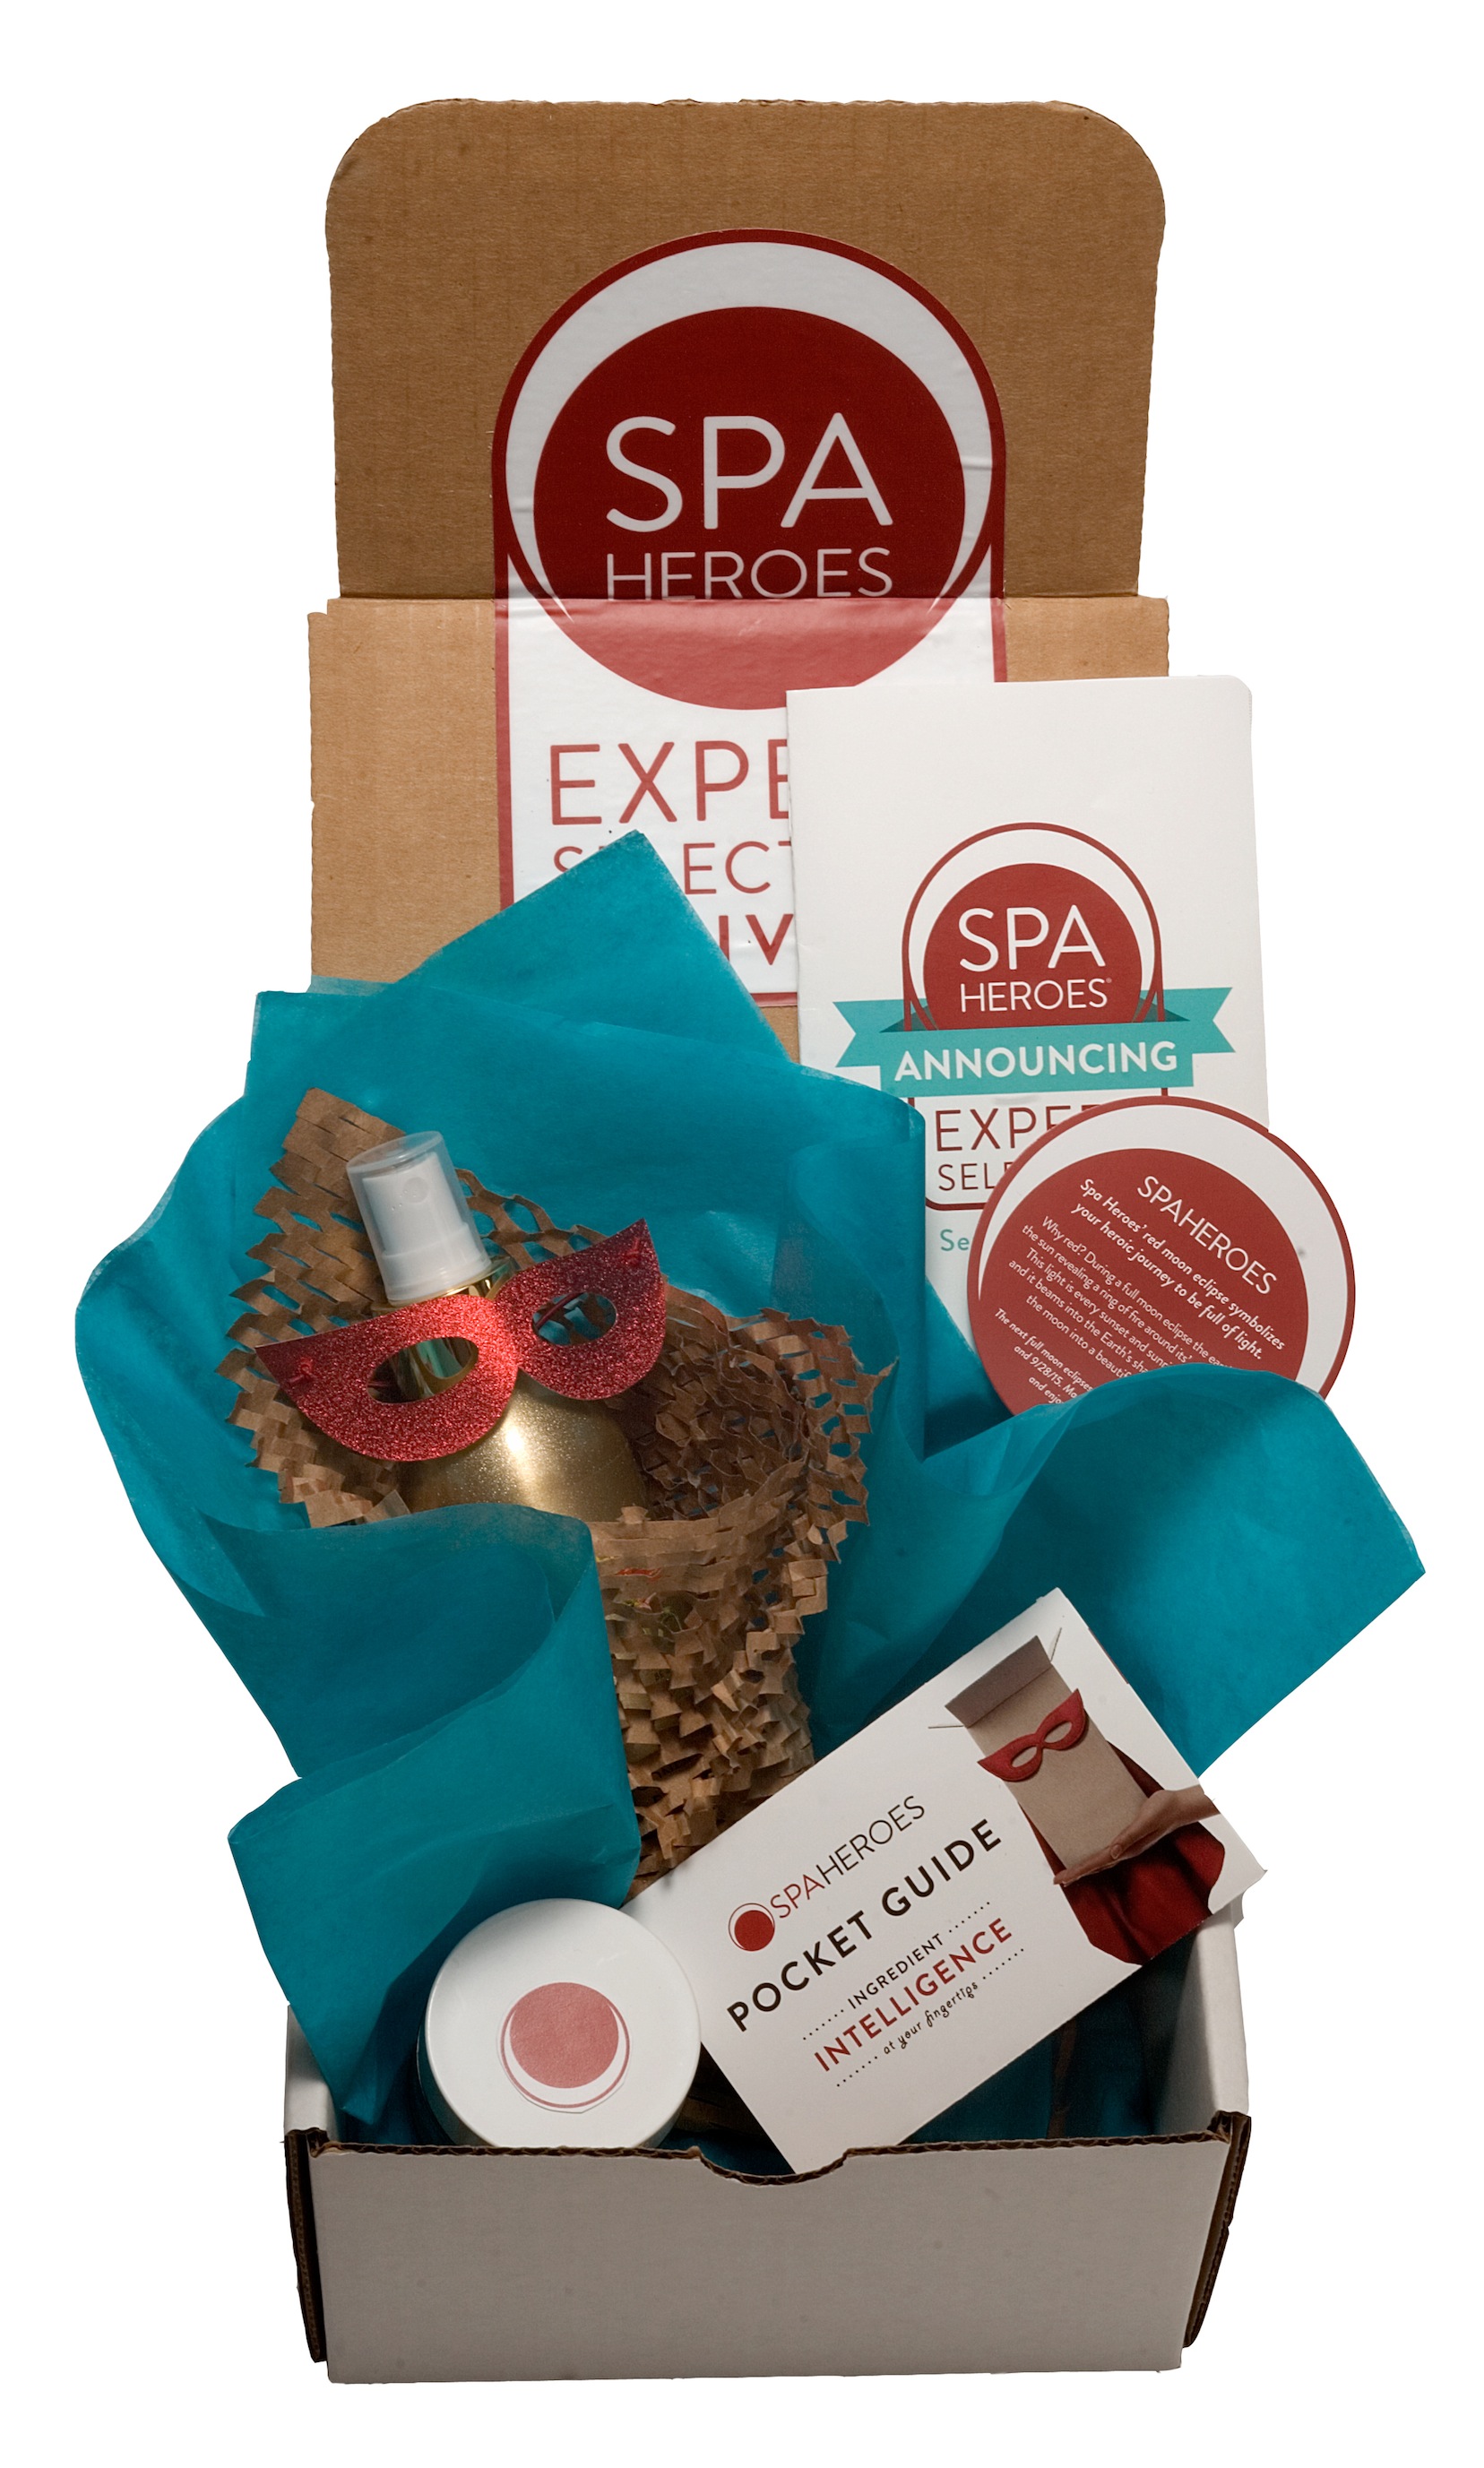 Spa Heroes beauty subscription service: Full-size products!